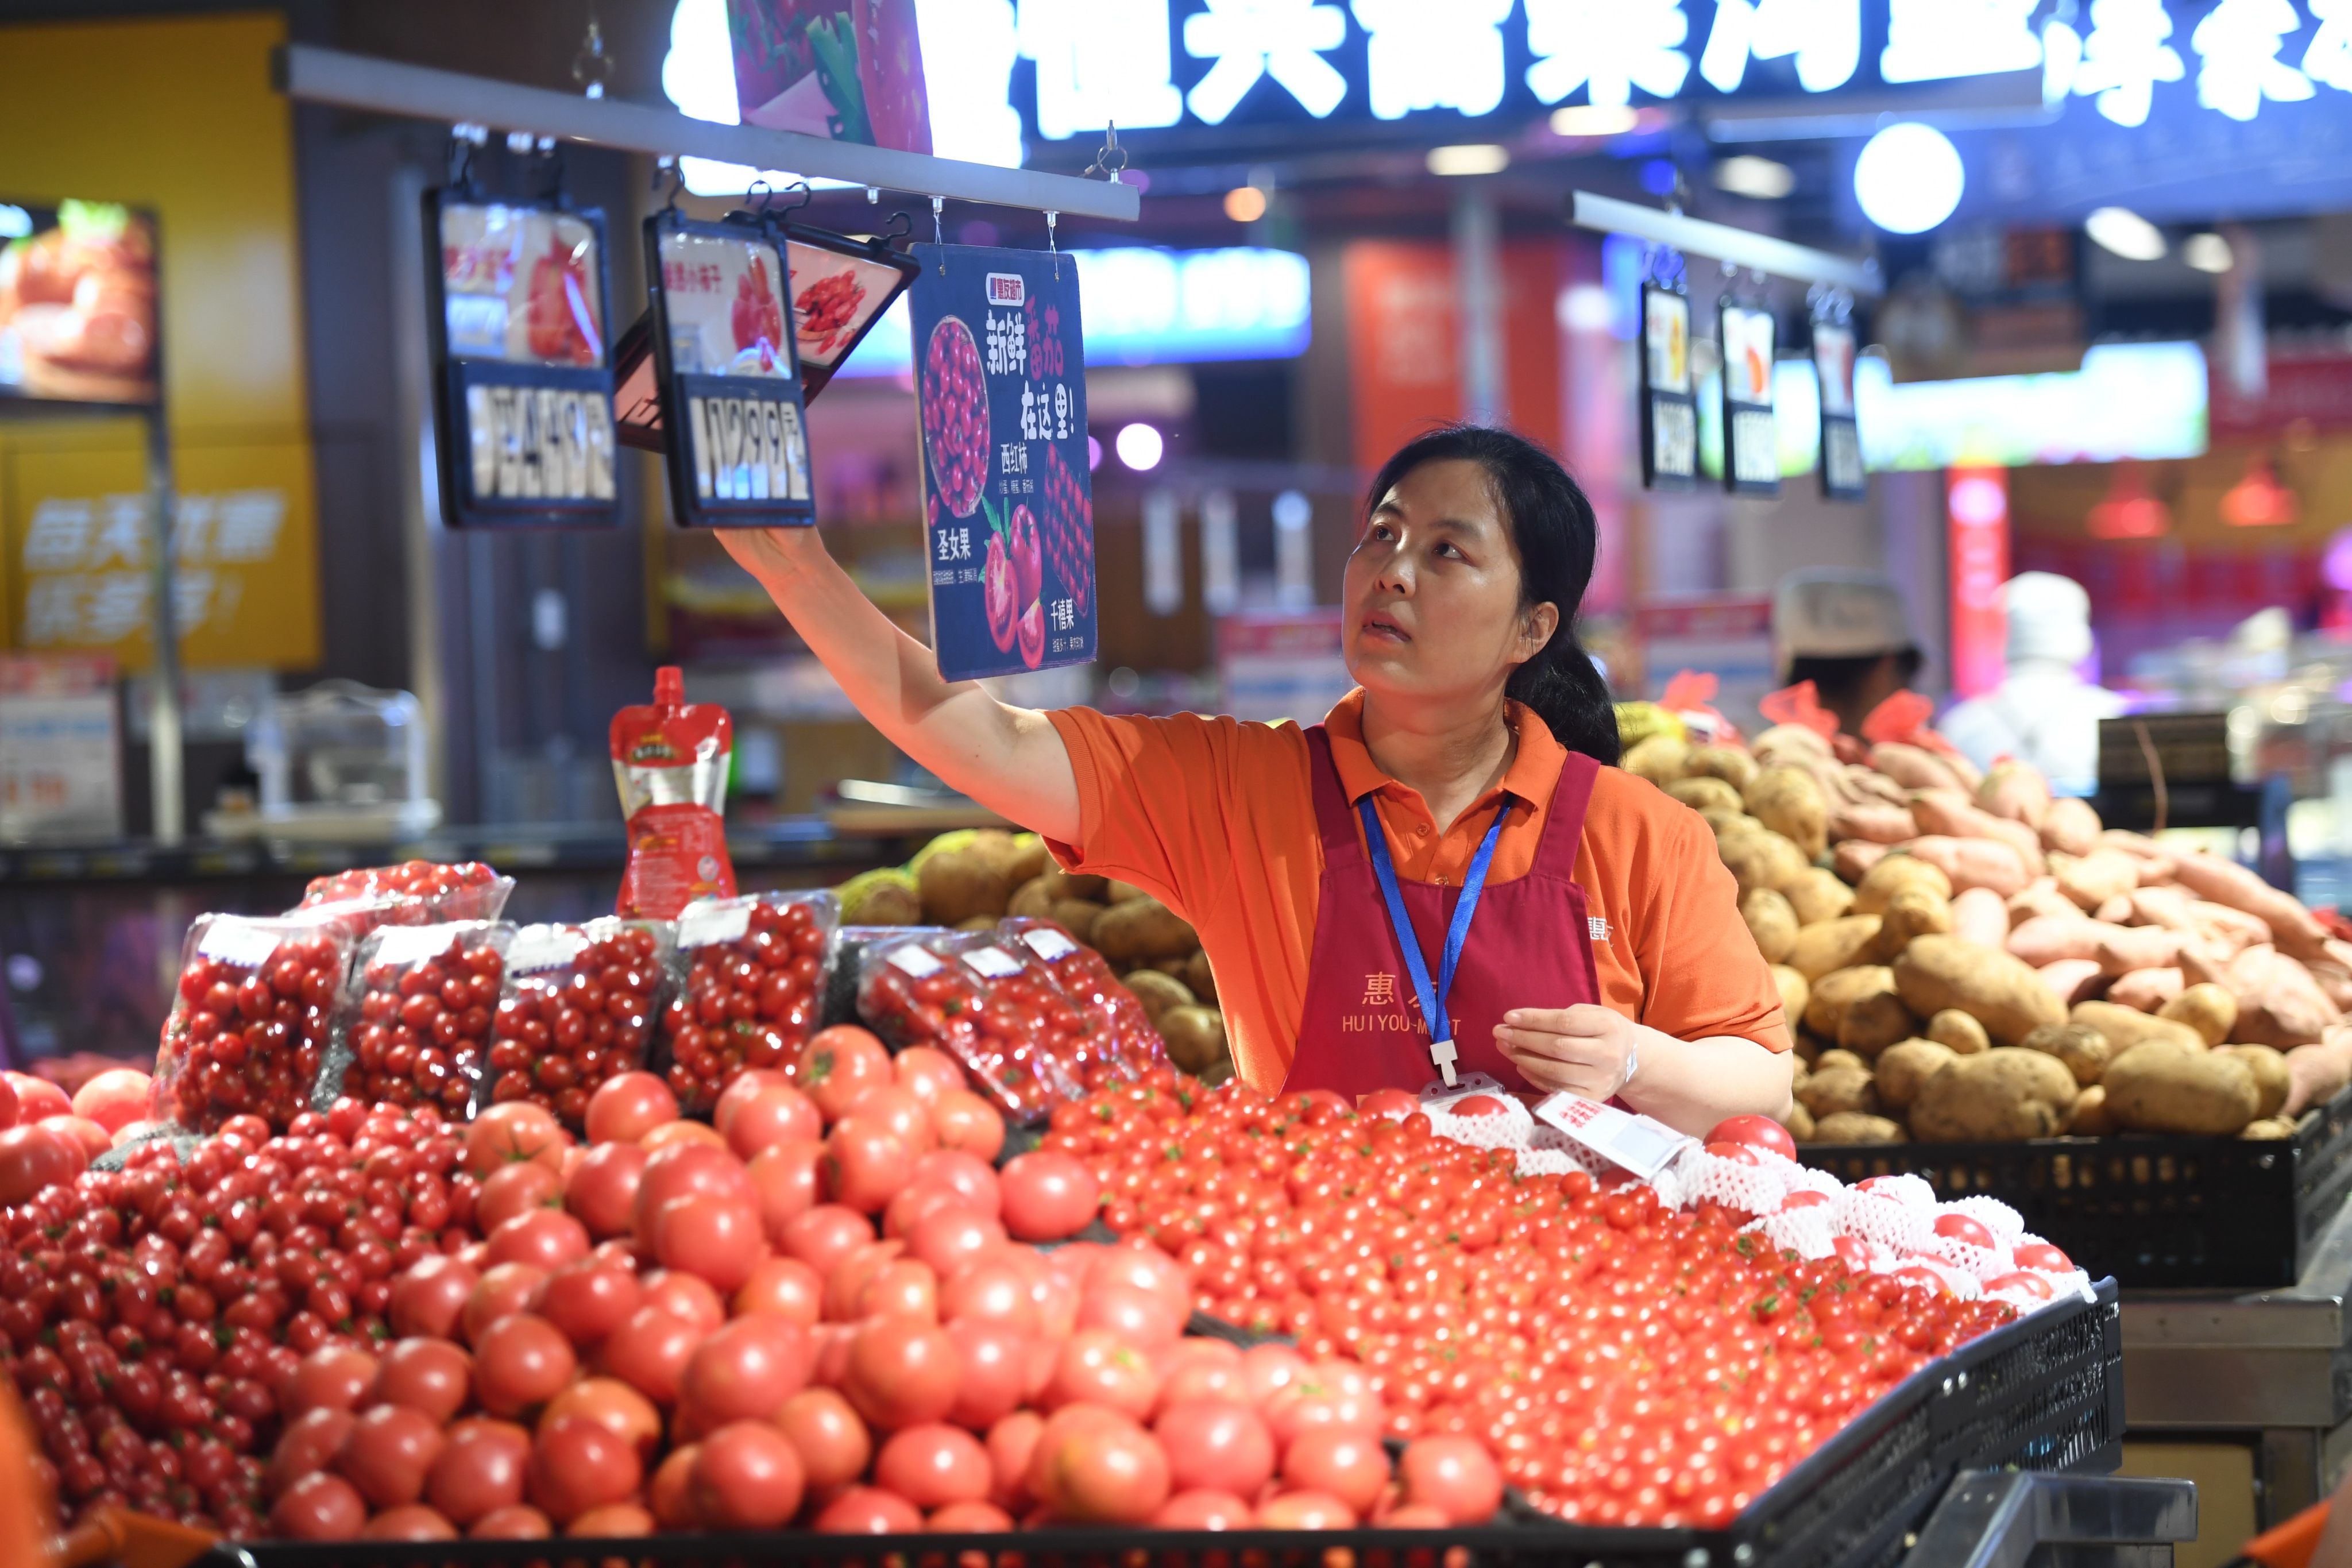 Beijing has repeatedly denied it has entered a period of deflation, which technically requires three consecutive monthly declines in consumer prices. Photo: Xinhua